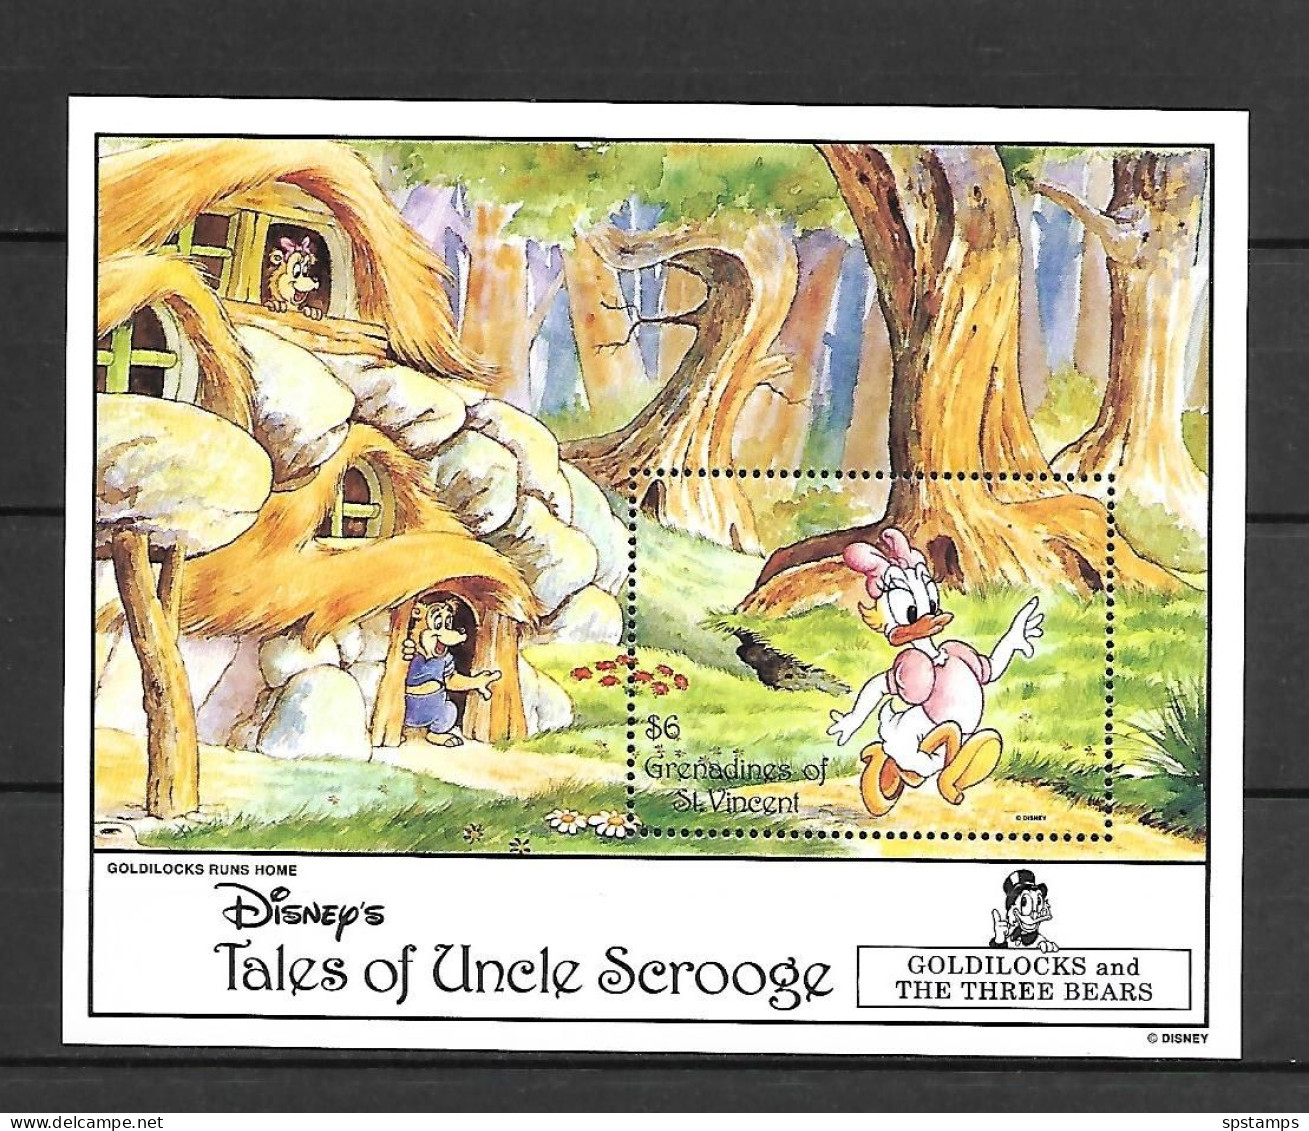 Disney St Vincent Gr 1992 Tales Of Ungle Scrooge - Goldilocks And The And Three Bears MS #2 MNH - Disney